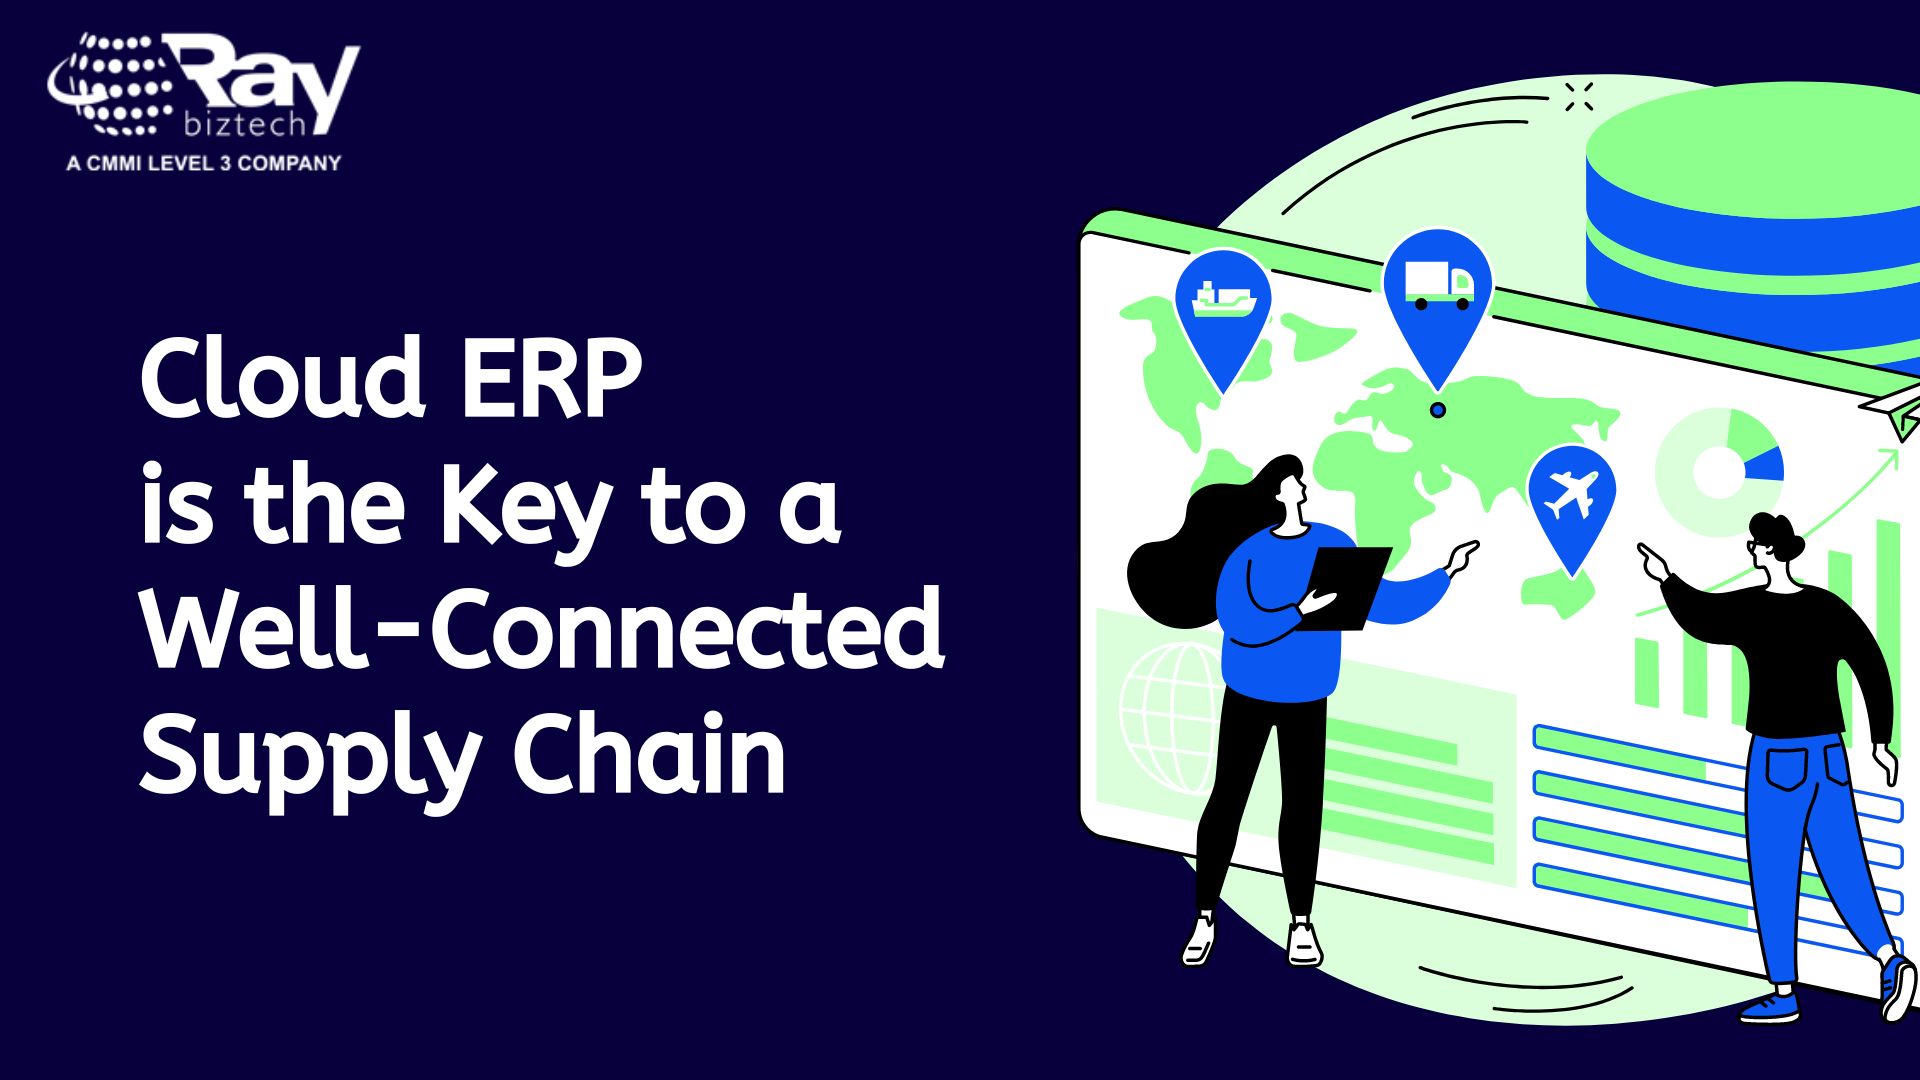 5 Reasons Why Your Company Should Use an ERP System